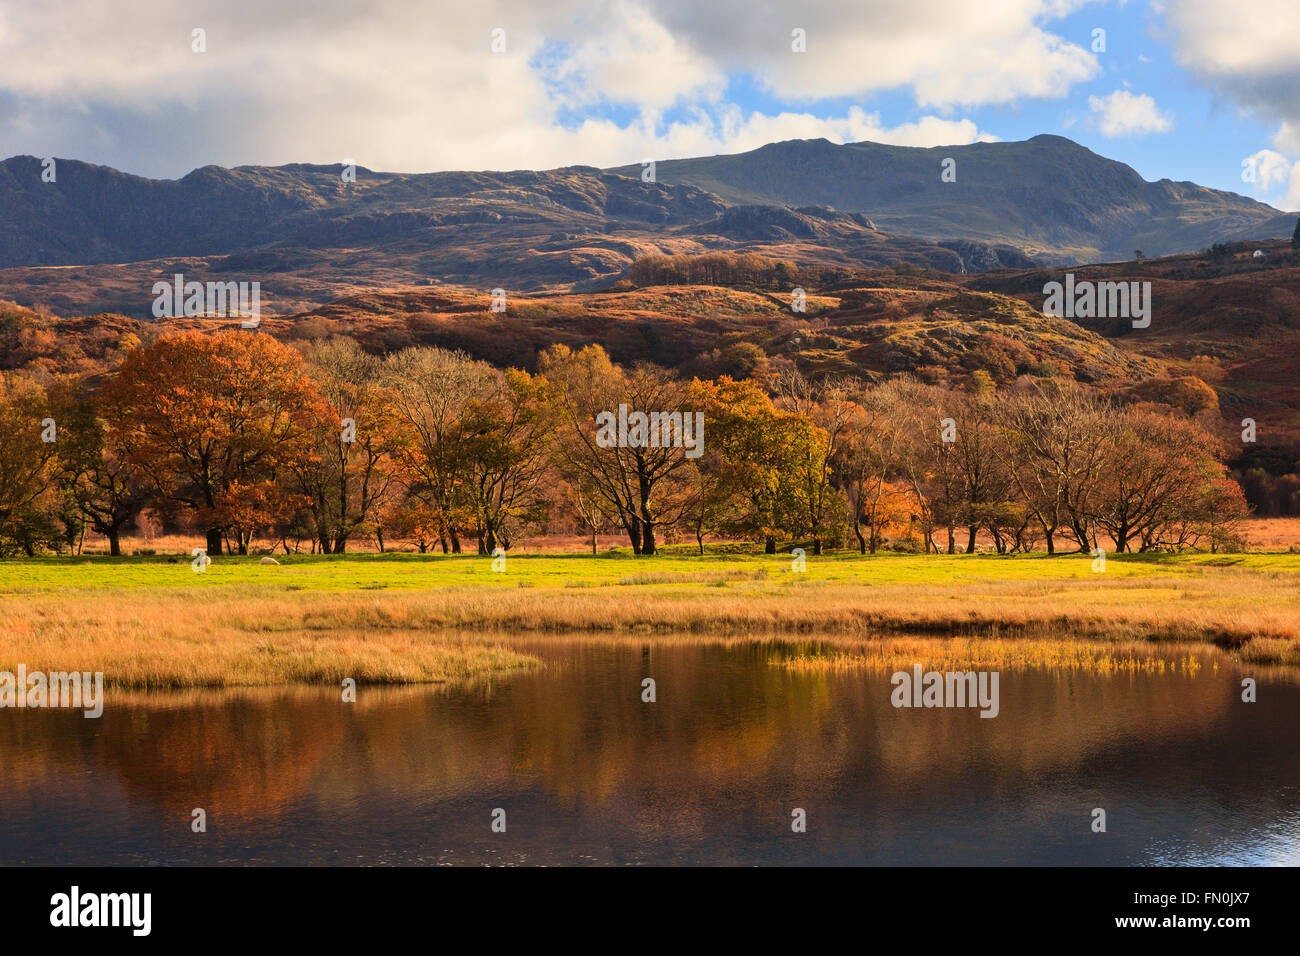 View to distant Cnicht mountain with trees in autumn colour reflected in Llyn Dinas lake in Snowdonia in November. Nant Gwynant Gwynedd North Wales UK Stock Photo